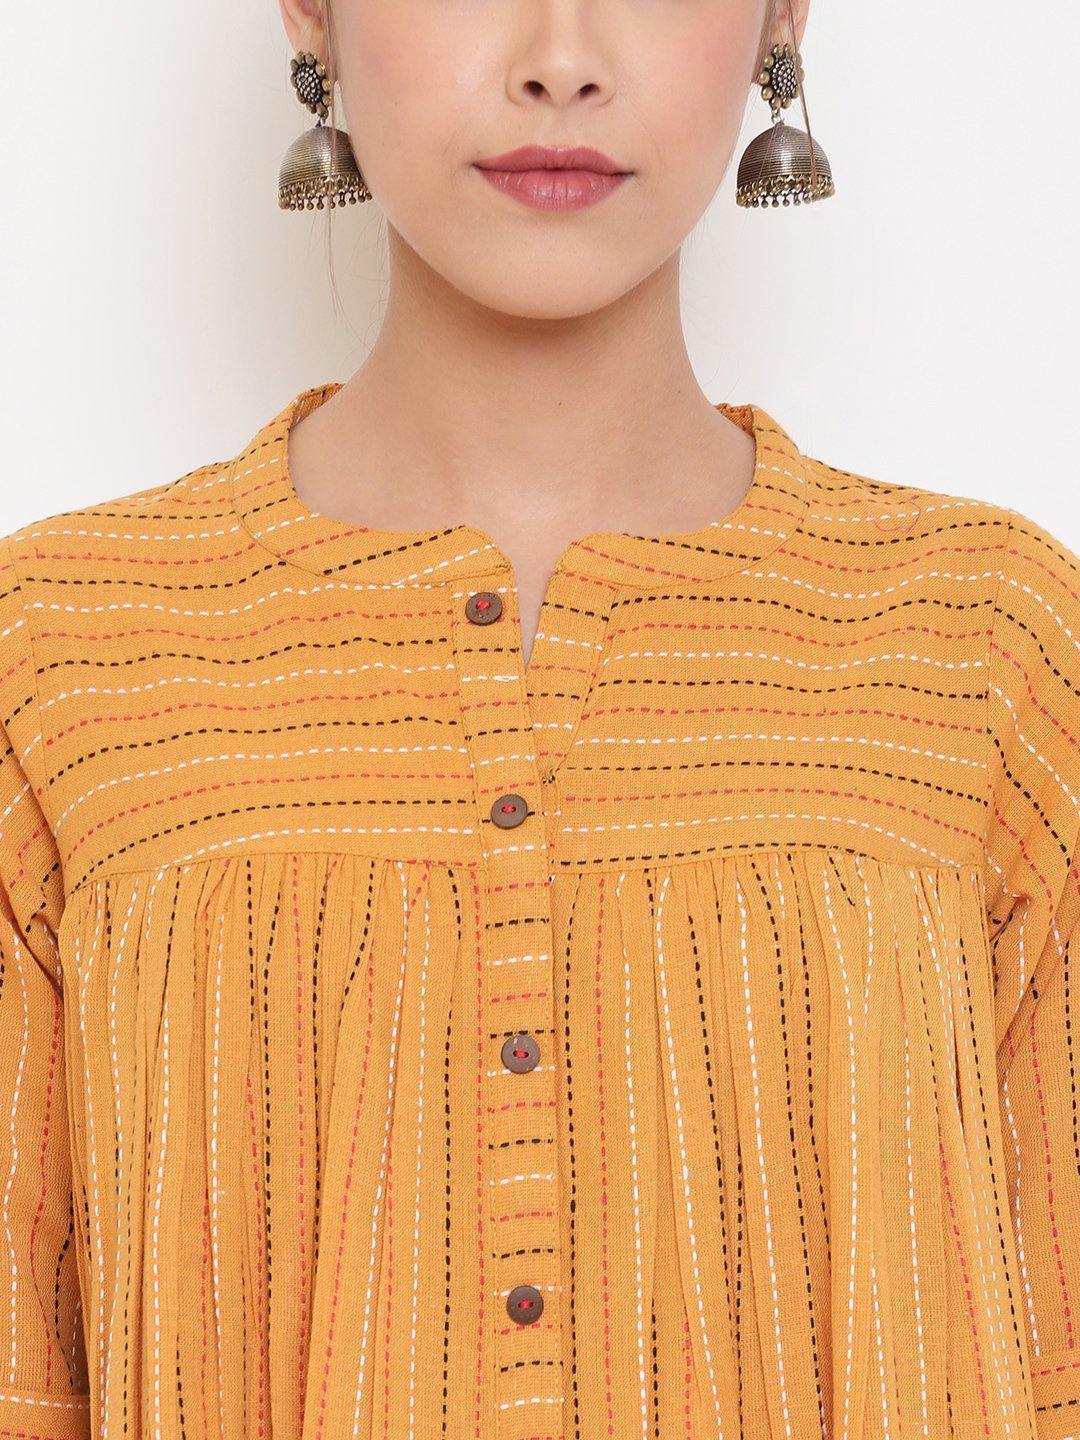 Women's Mustard Cotton Woven Design Gathered Product Type-Tops - Final Clearance Sale